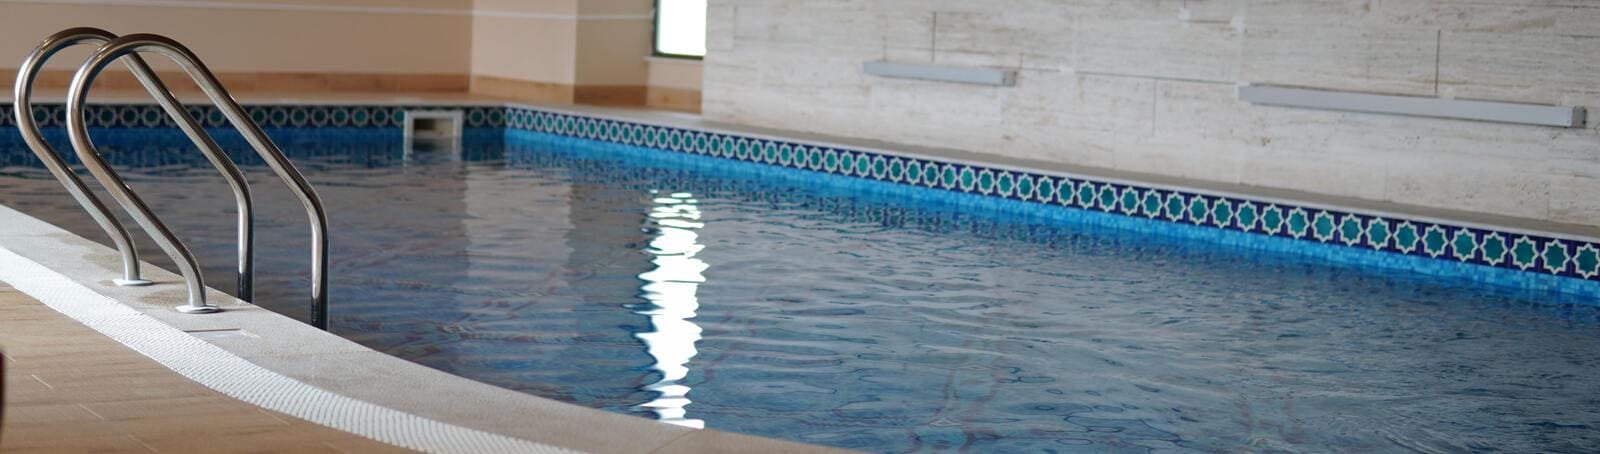 Swimming Pool and LoftThaiSpa: Combining Relaxation and Exercise